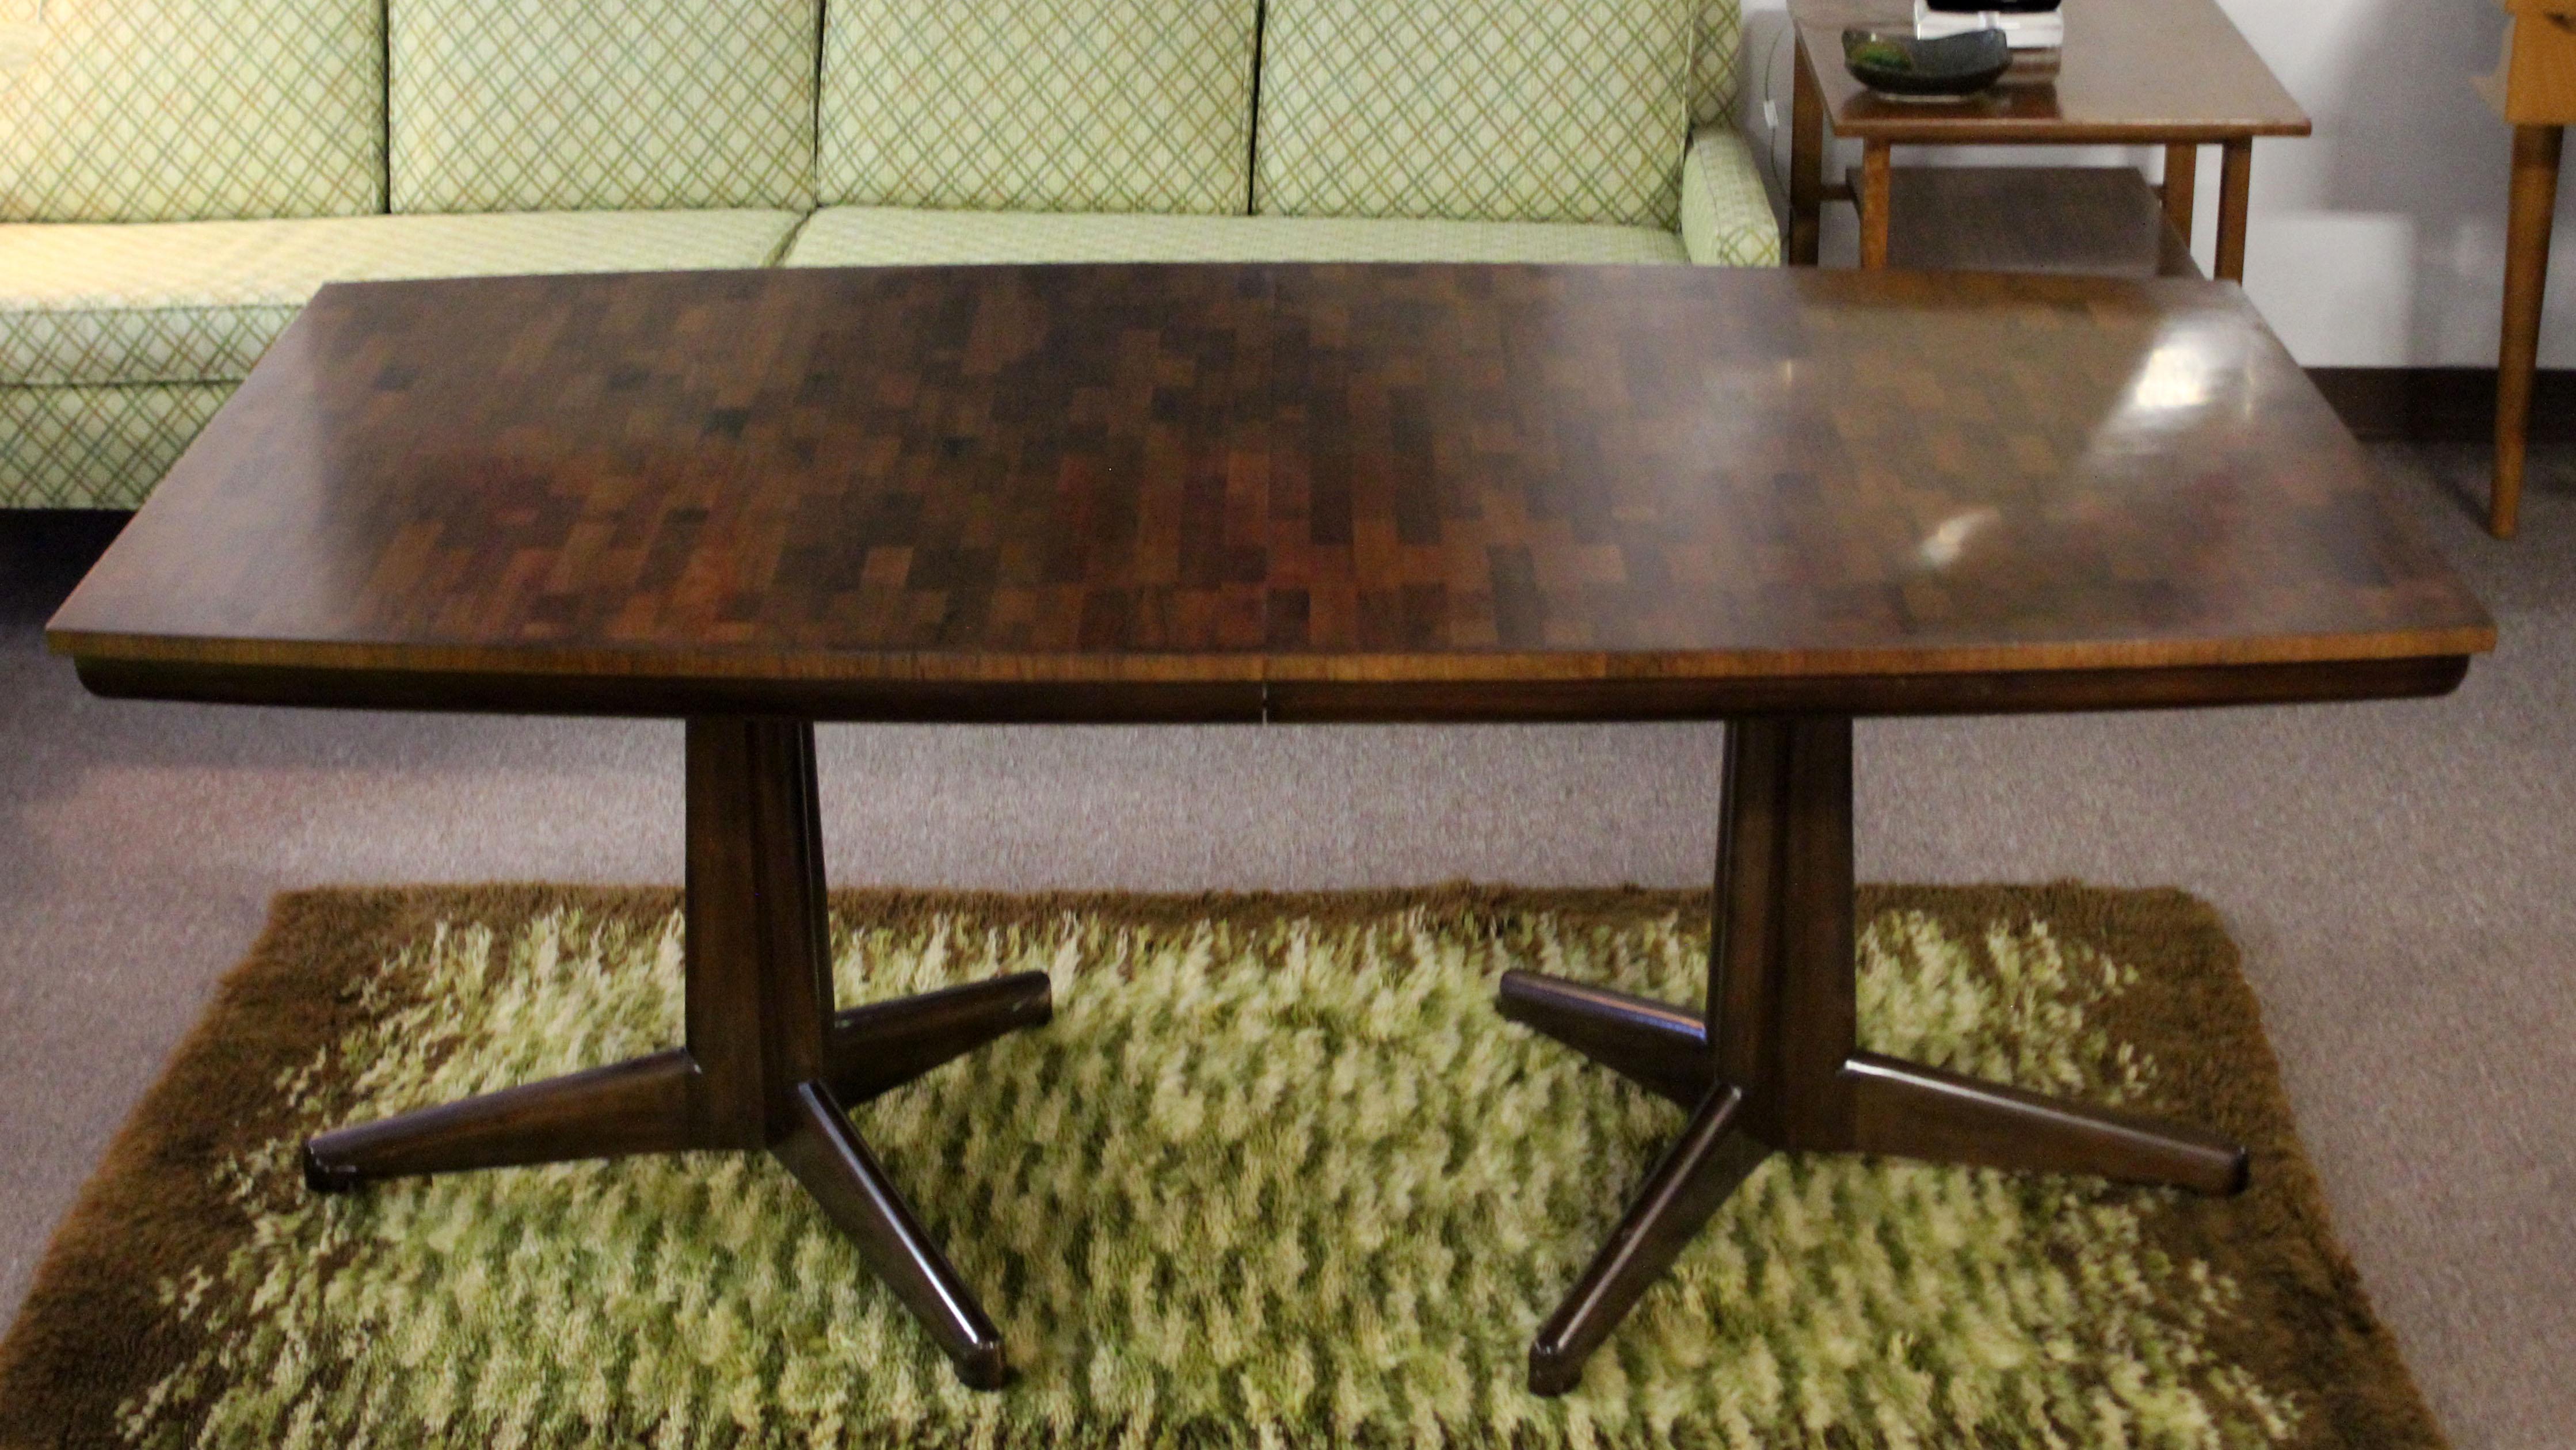 For your consideration is an incredible, parquet wood, expandable dining table, with three leaves, by Dale Ford for Widdicomb, circa the 1970s. In excellent condition. The dimensions closed are 72